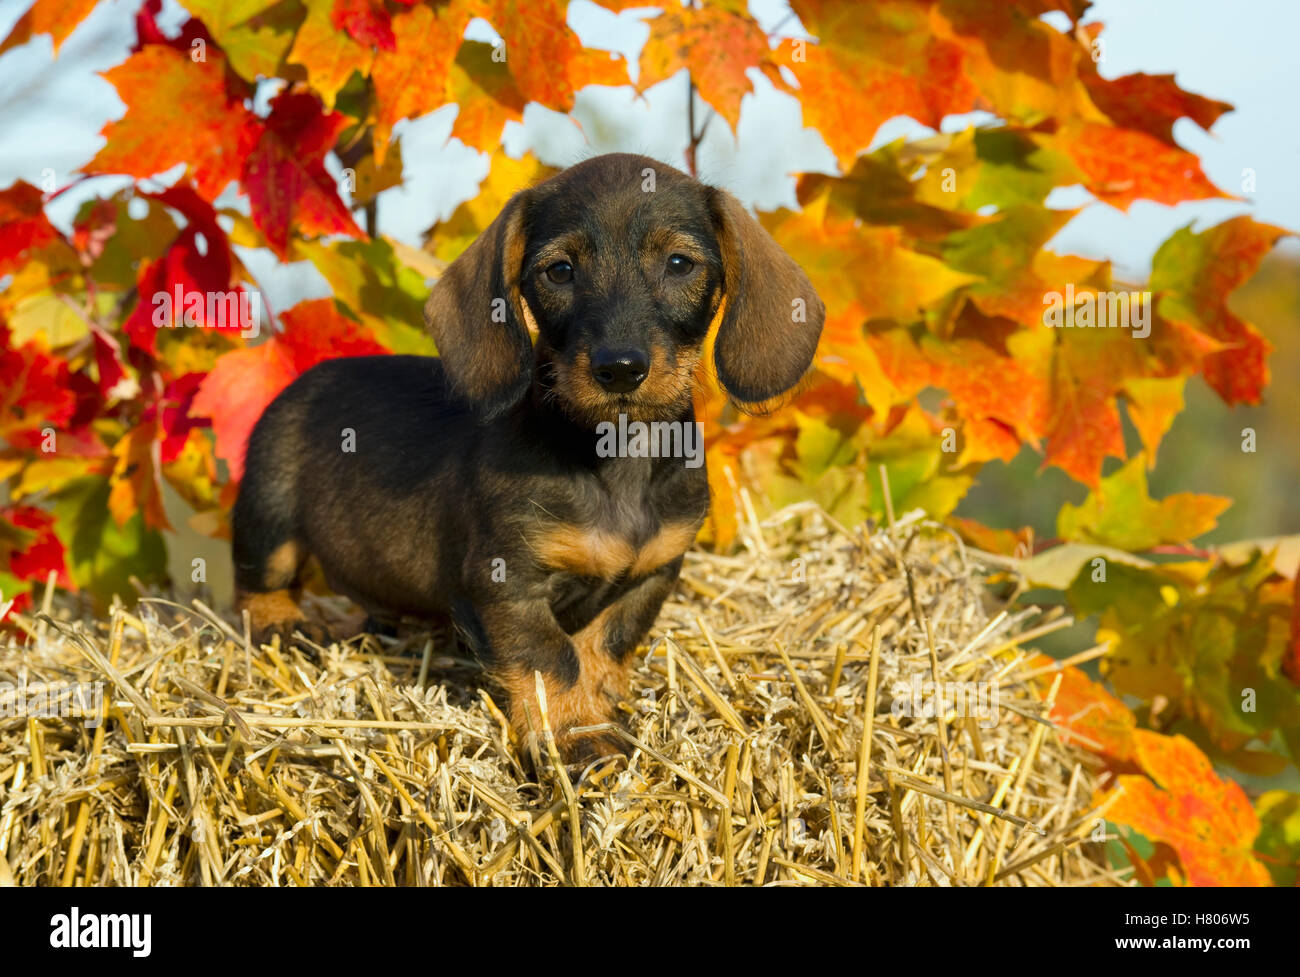 Miniature Wire-haired Dachshund (Canis familiaris) puppy on hay bale with autumn leaves Stock Photo